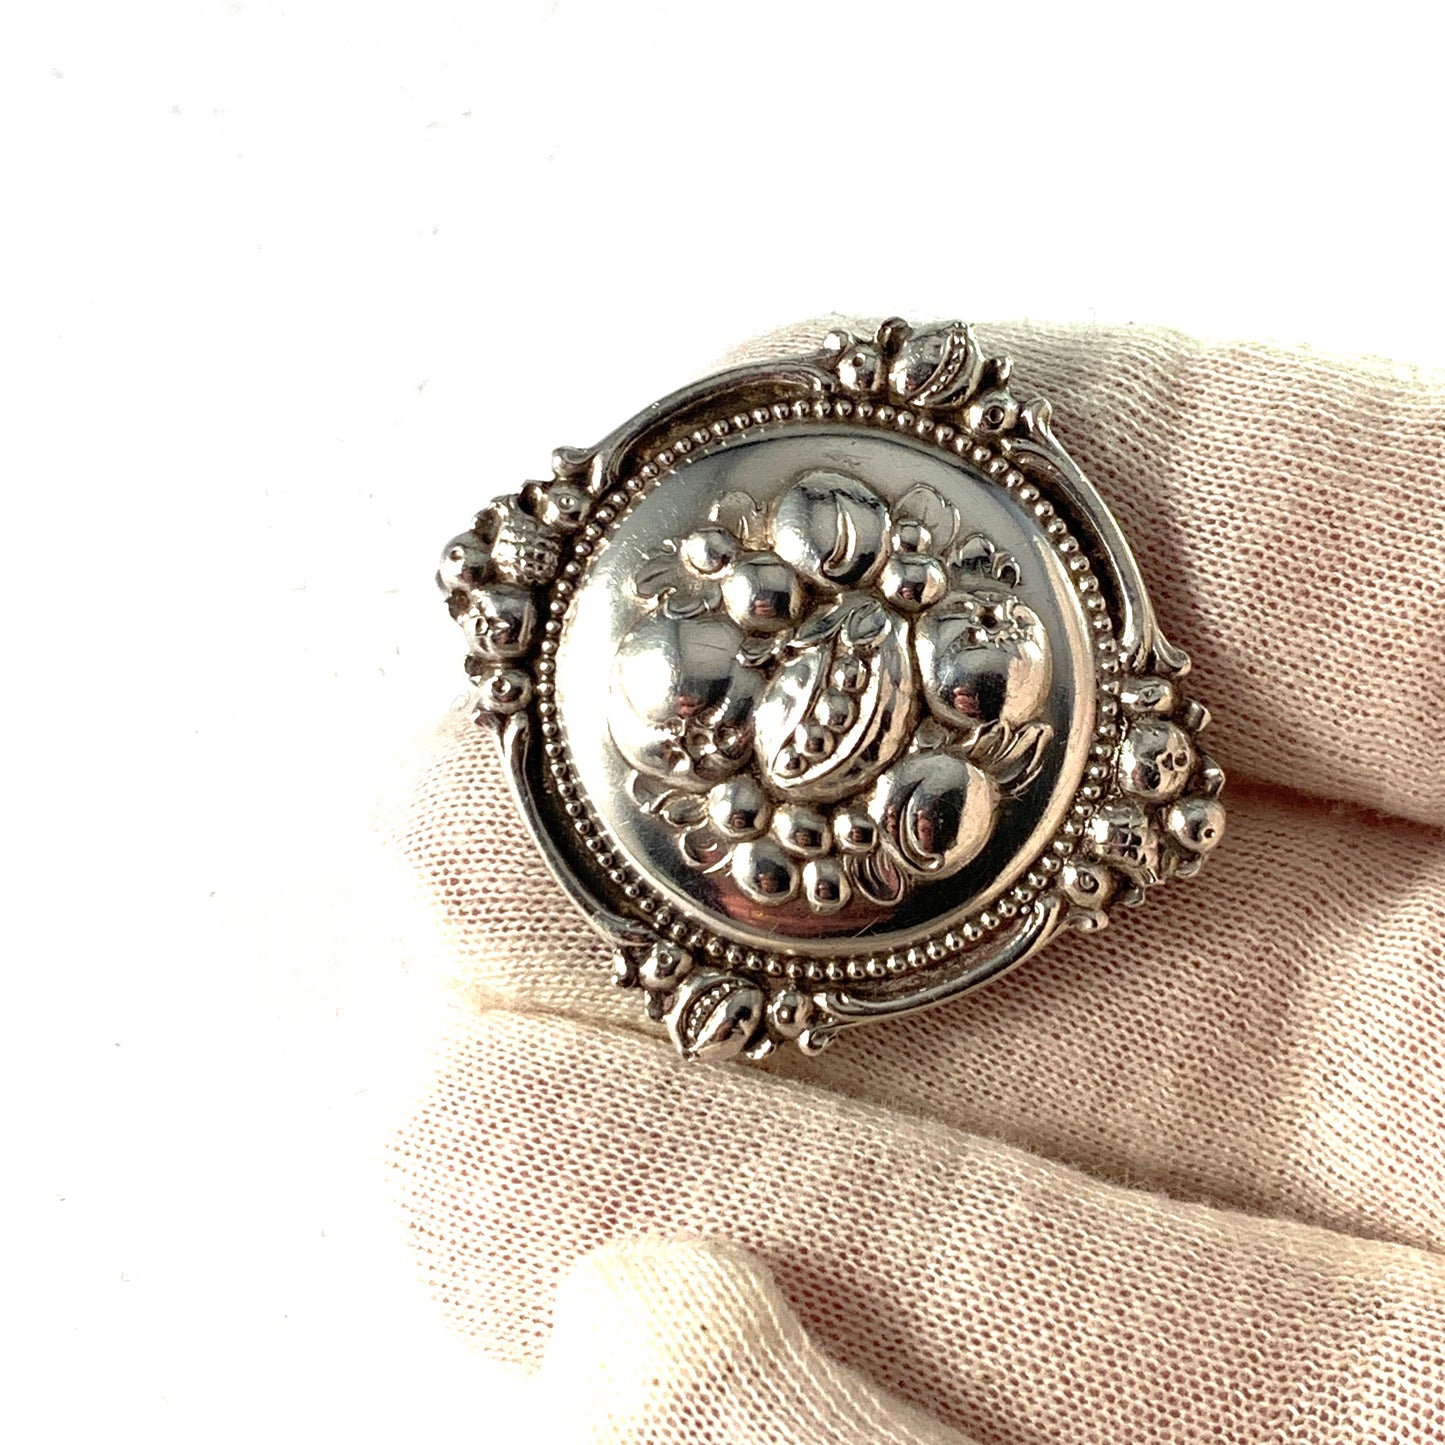 Maker HJ, Germany early 1900s. Antique 830 Silver Brooch.